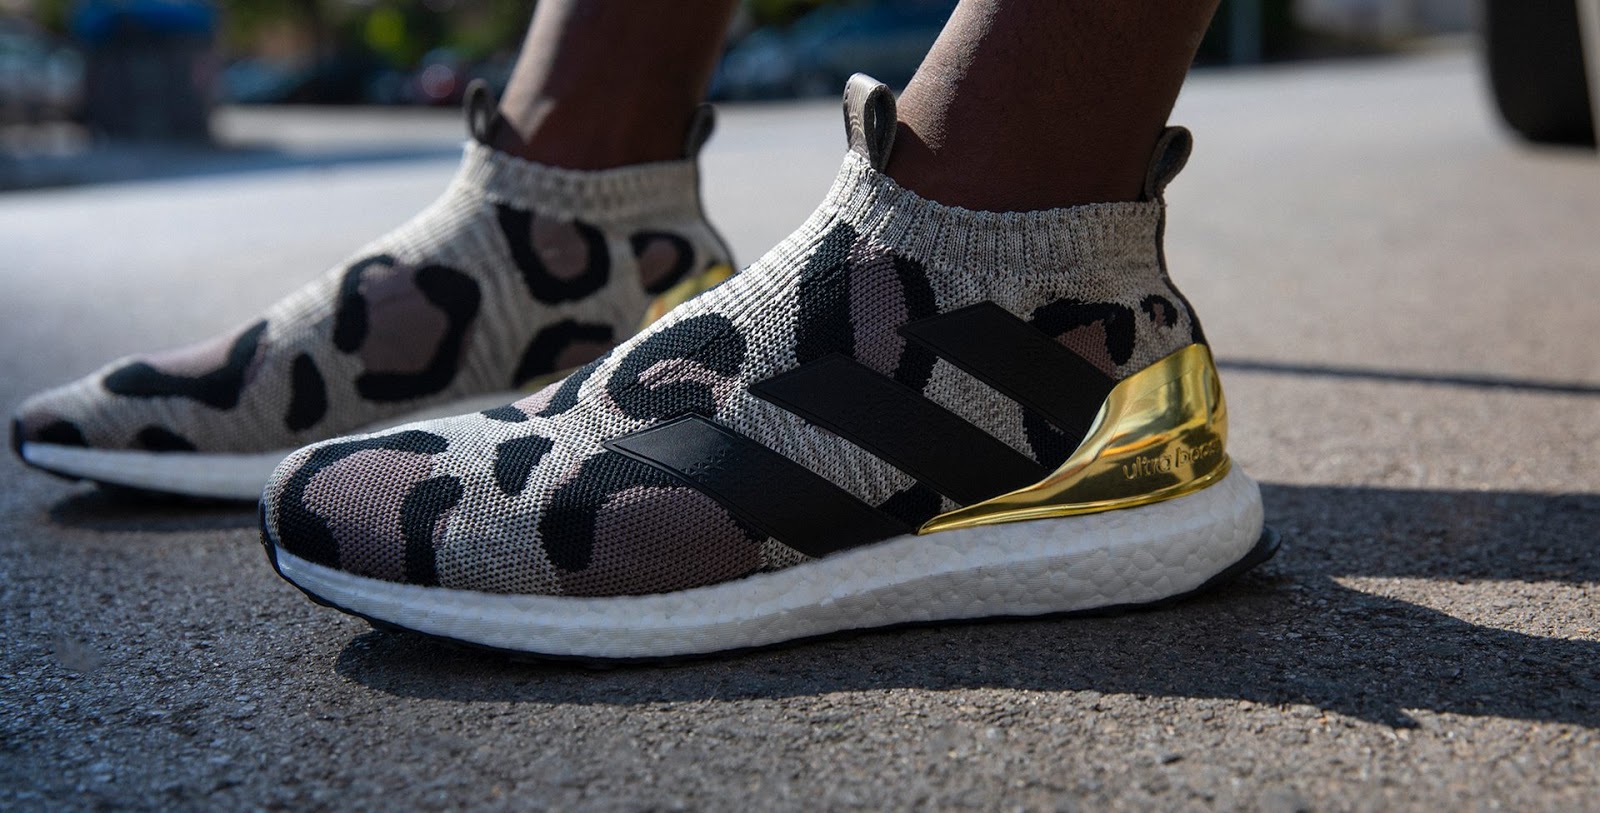 adidas boost camouflage